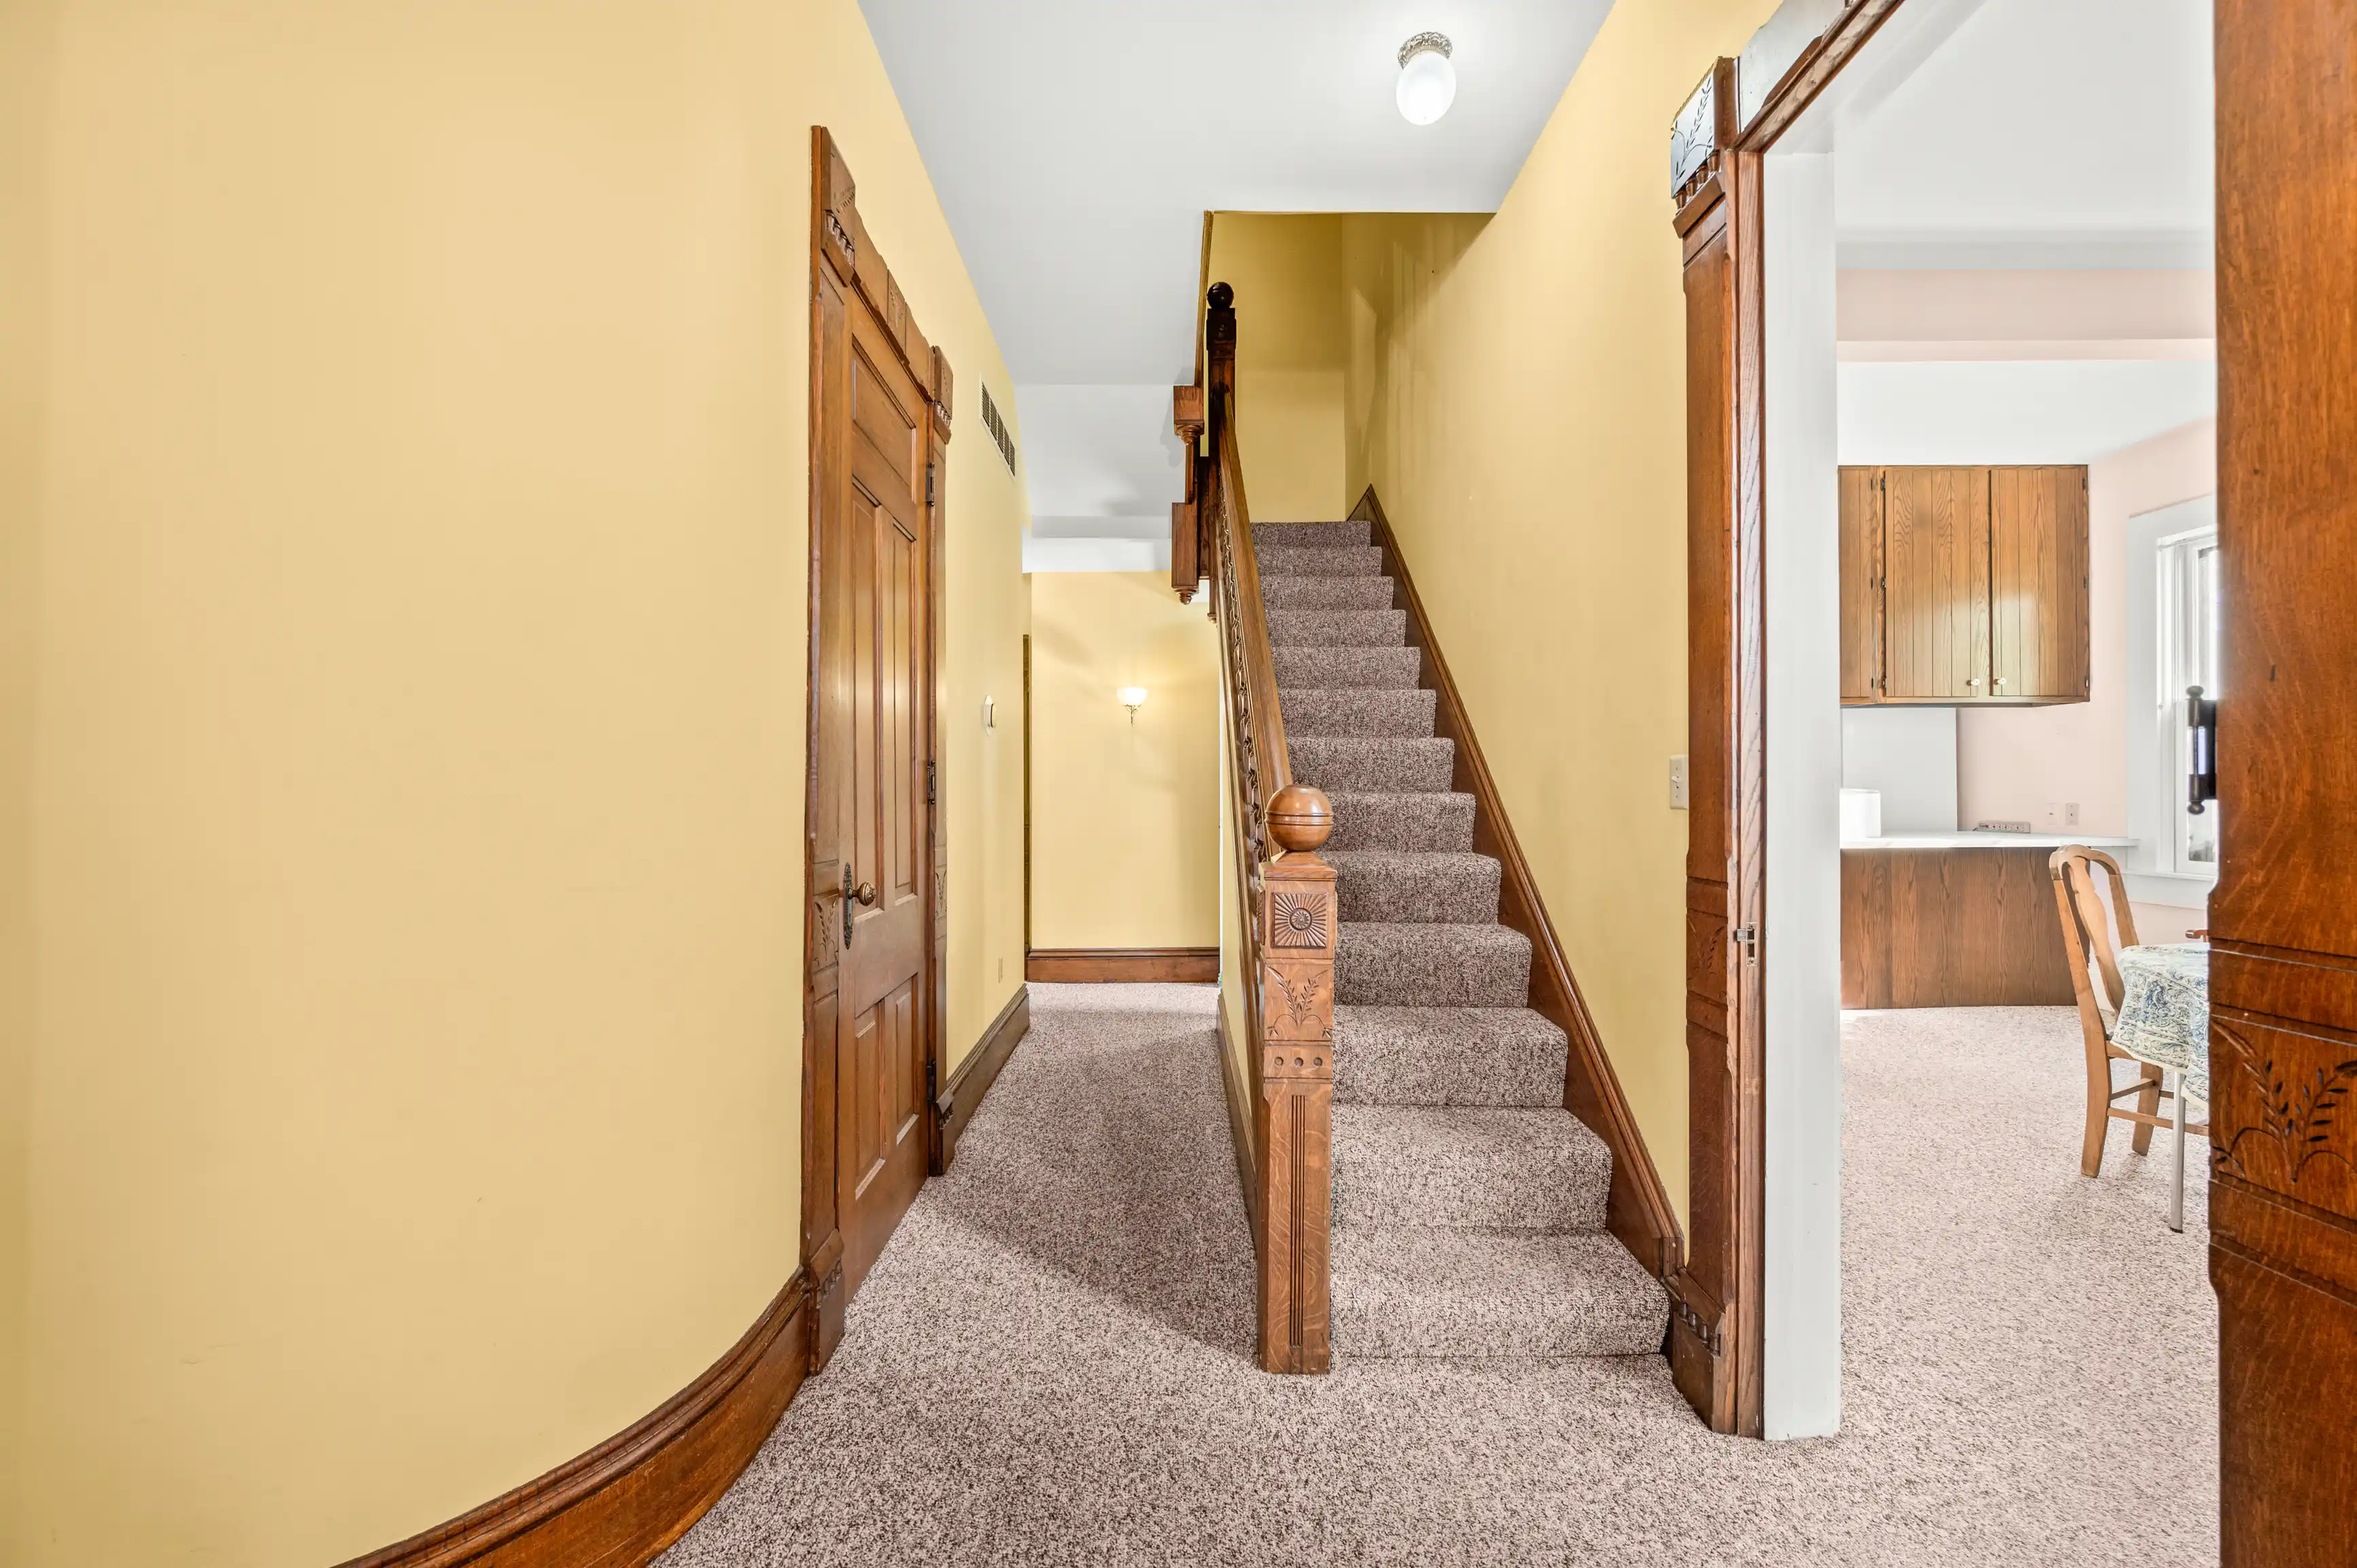 Interior view of a home showing a carpeted staircase with wooden banister, a hallway leading to other rooms, and an open door to a kitchen with wooden cabinets.